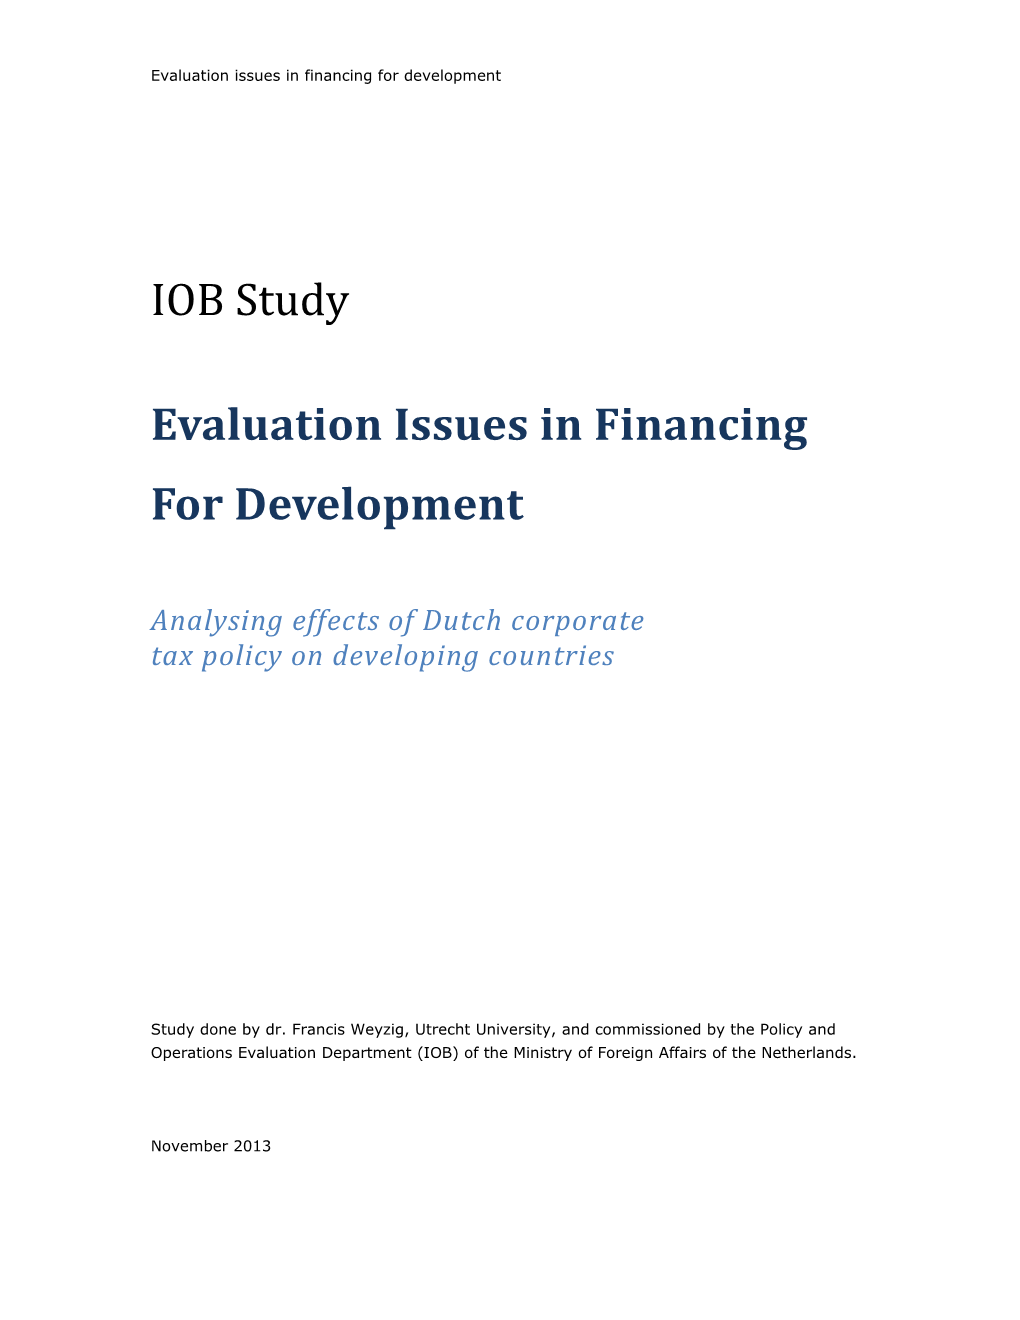 Evaluation Issues in Financing for Development